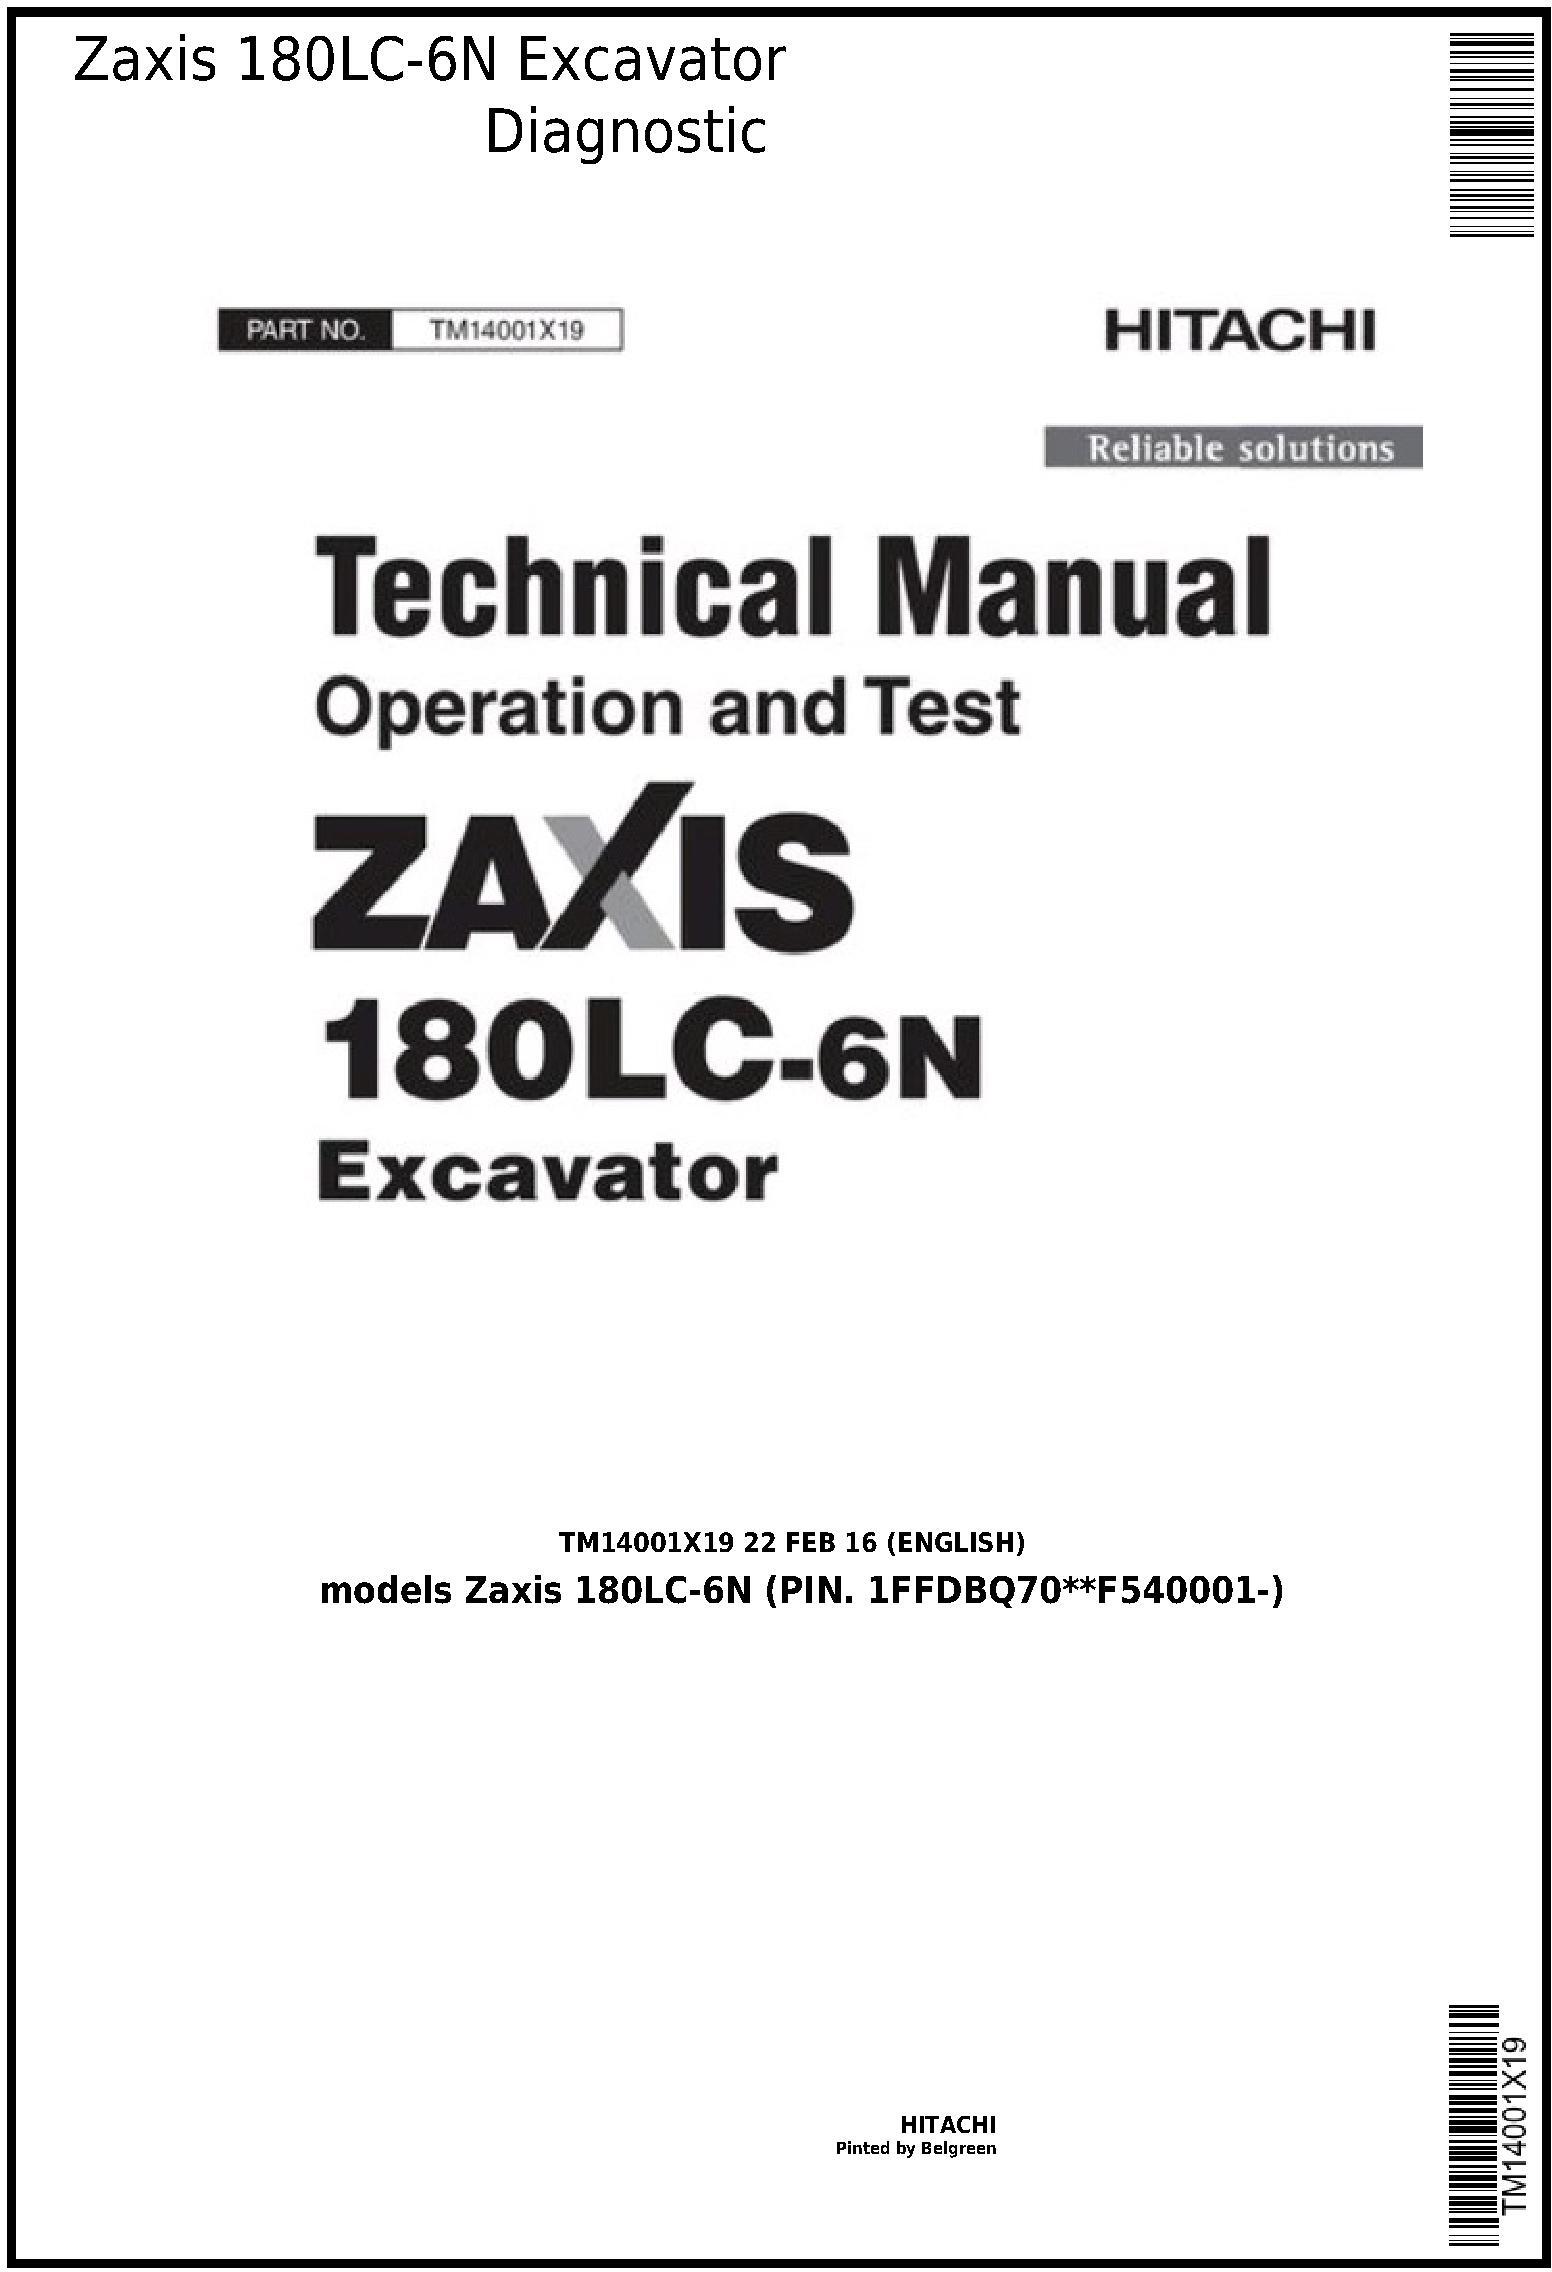 tm14001x19-hitachi-zaxis-180lc-6n-excavator-diagnostic-operation-and-test-service-manual